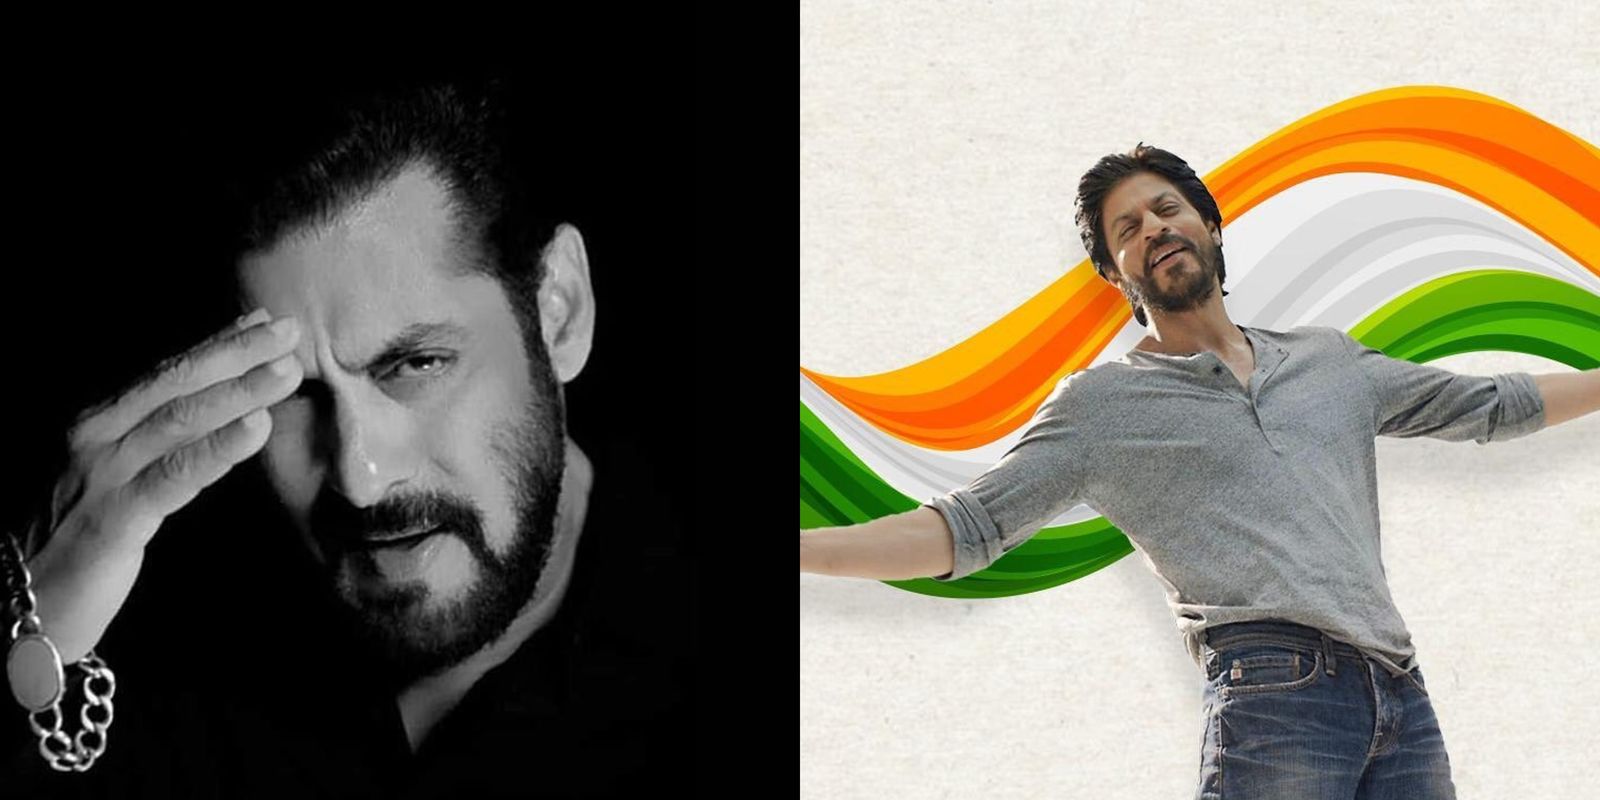 Salman Khan And Shah Rukh Khan Wish Fans On Independence Day In Their Own Unique Styles; Take A Look